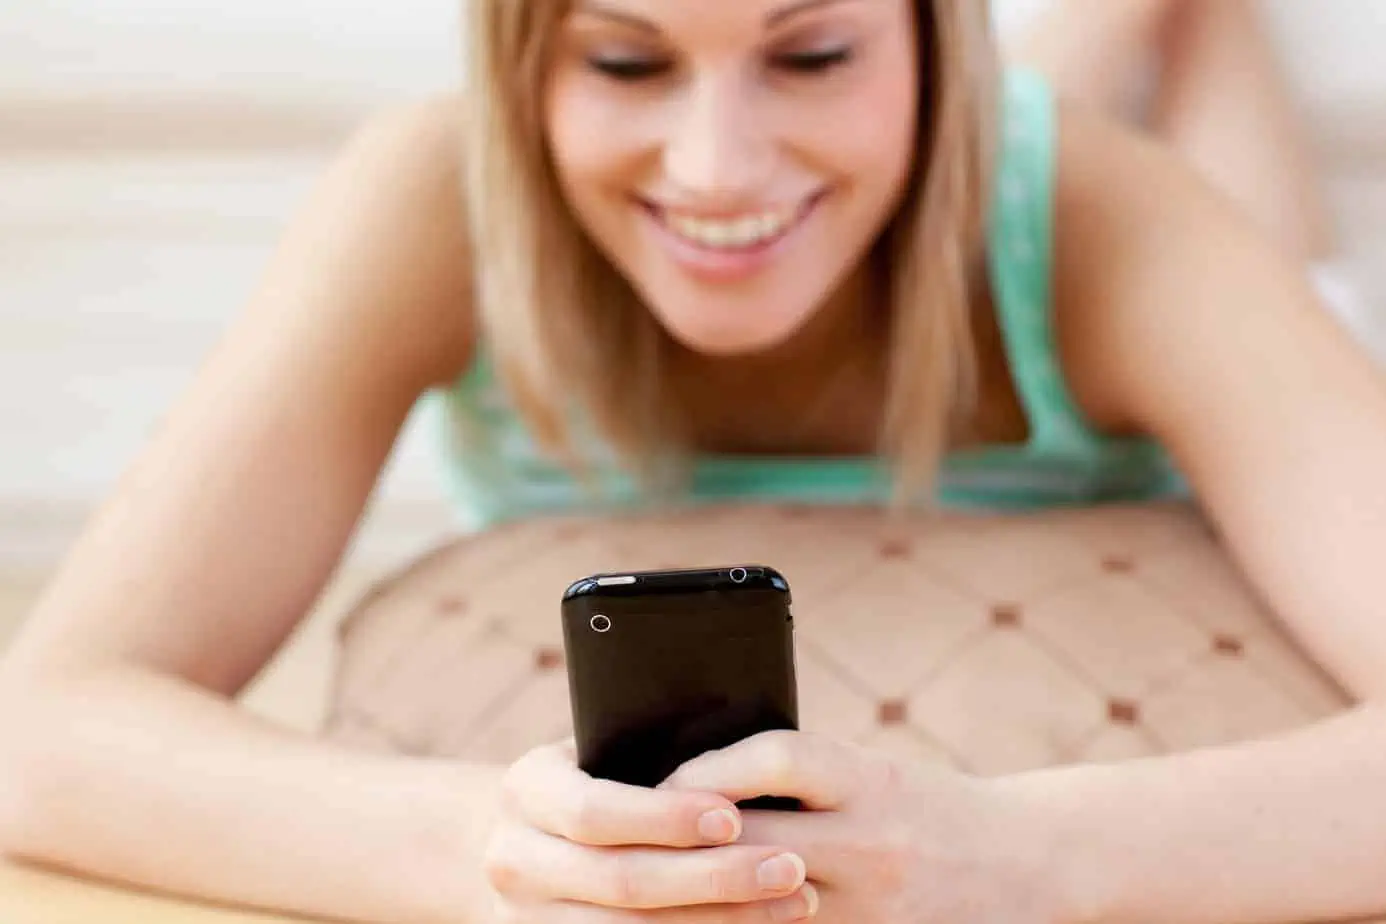 A woman is smiling while looking at her cell phone